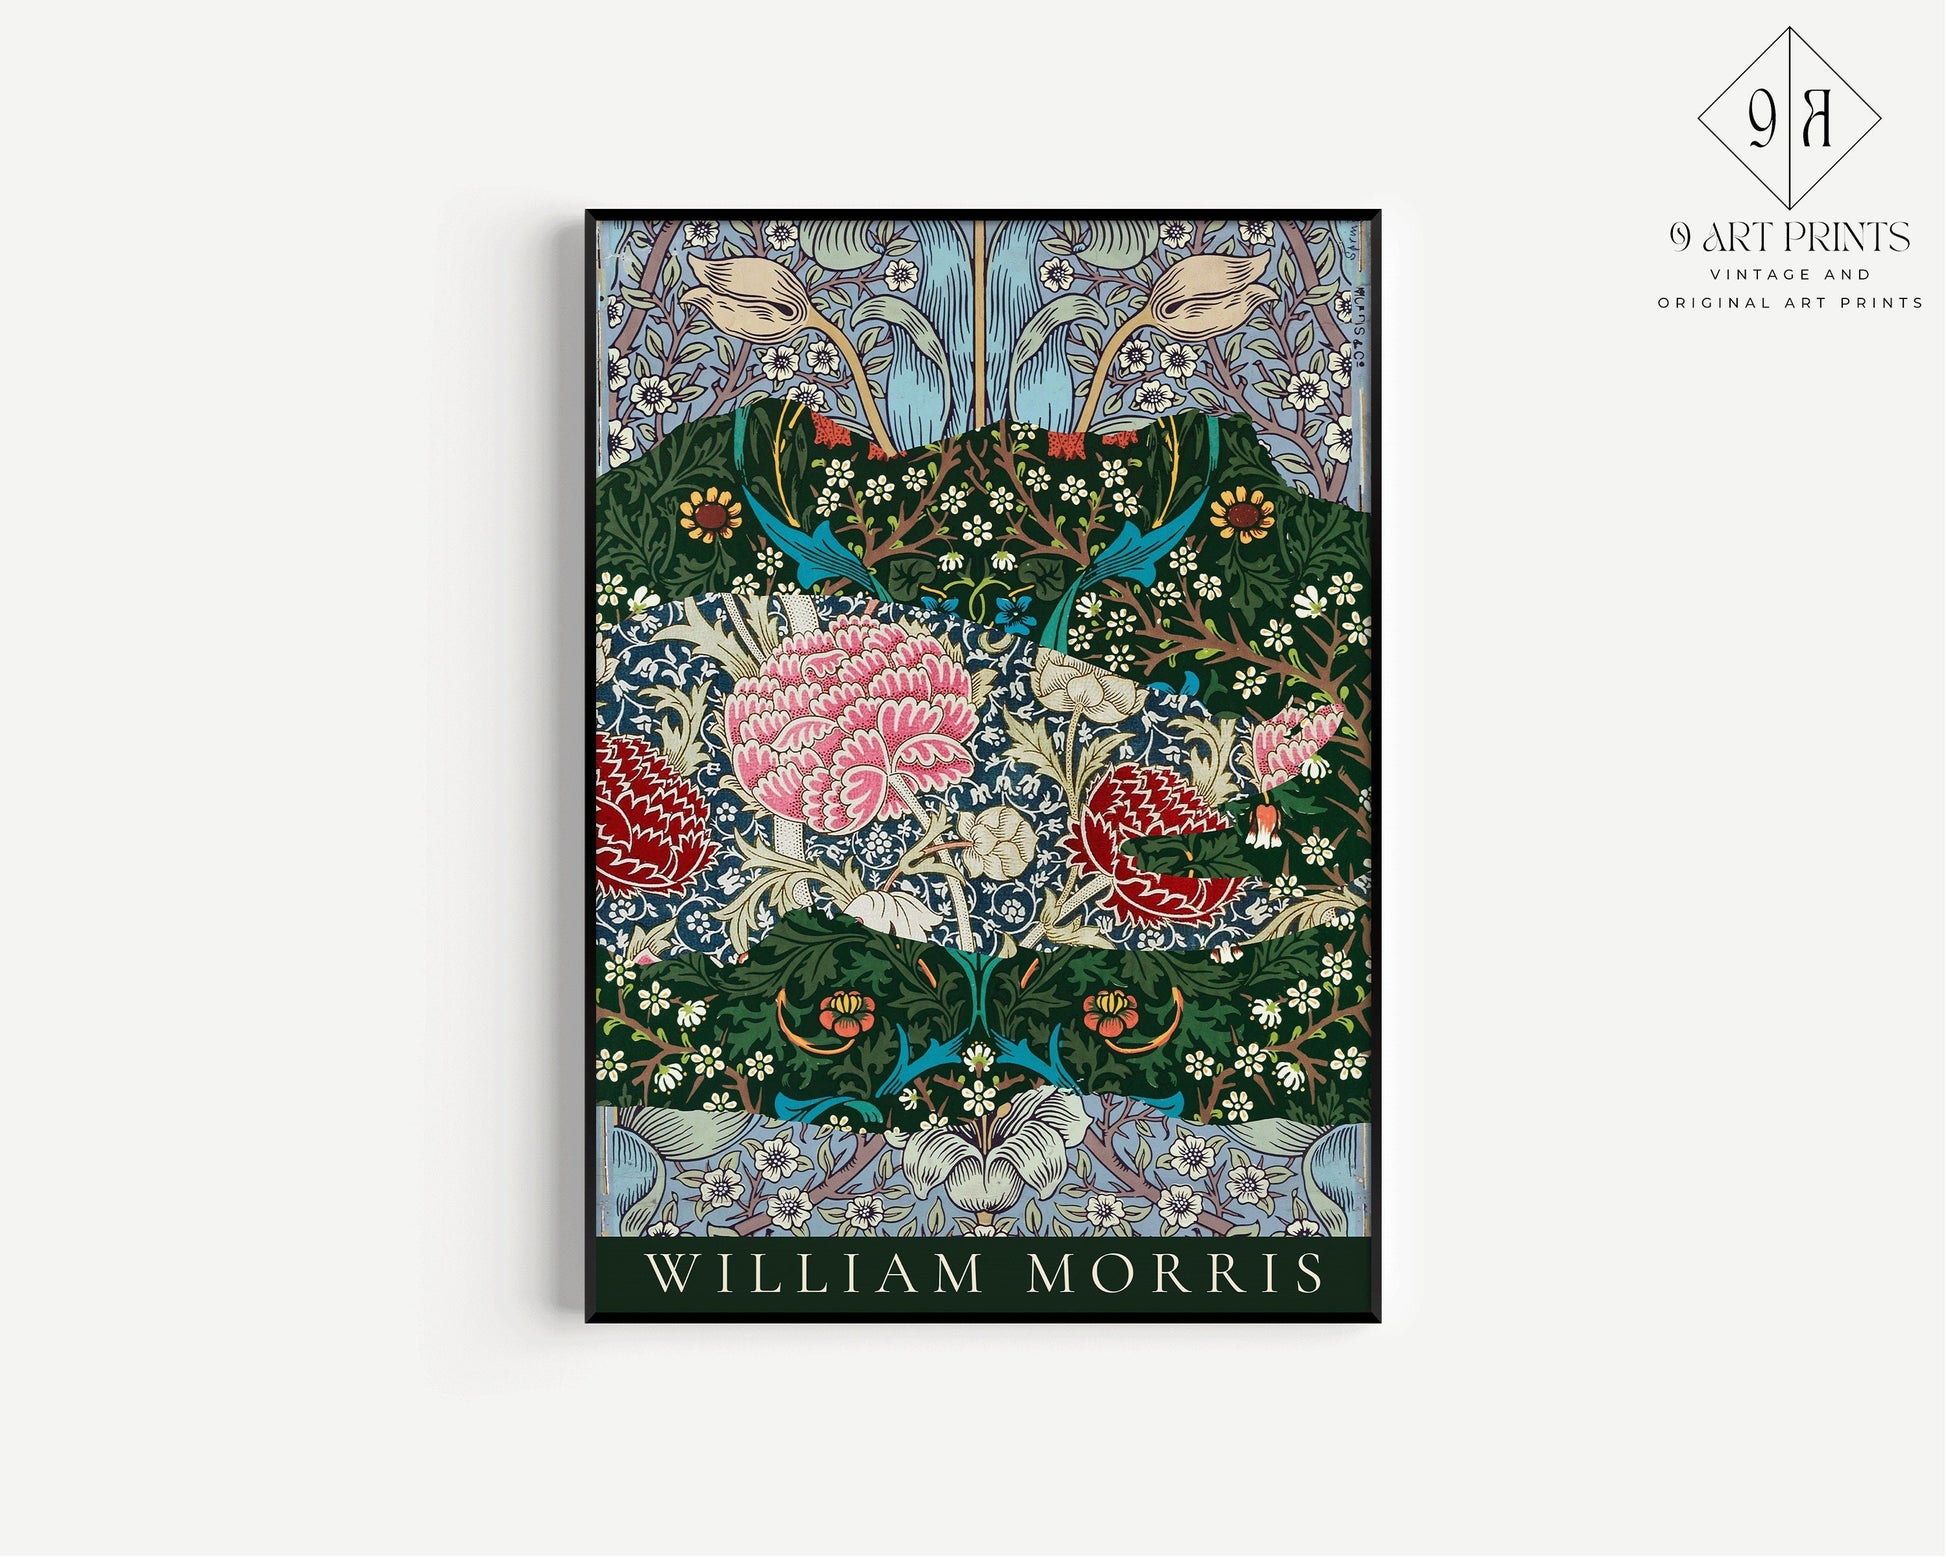 William Morris Poster Strips Poster Art Print Nouveau Flower Botanical Pattern Framed Ready to Hang Museum Exhibition Poster